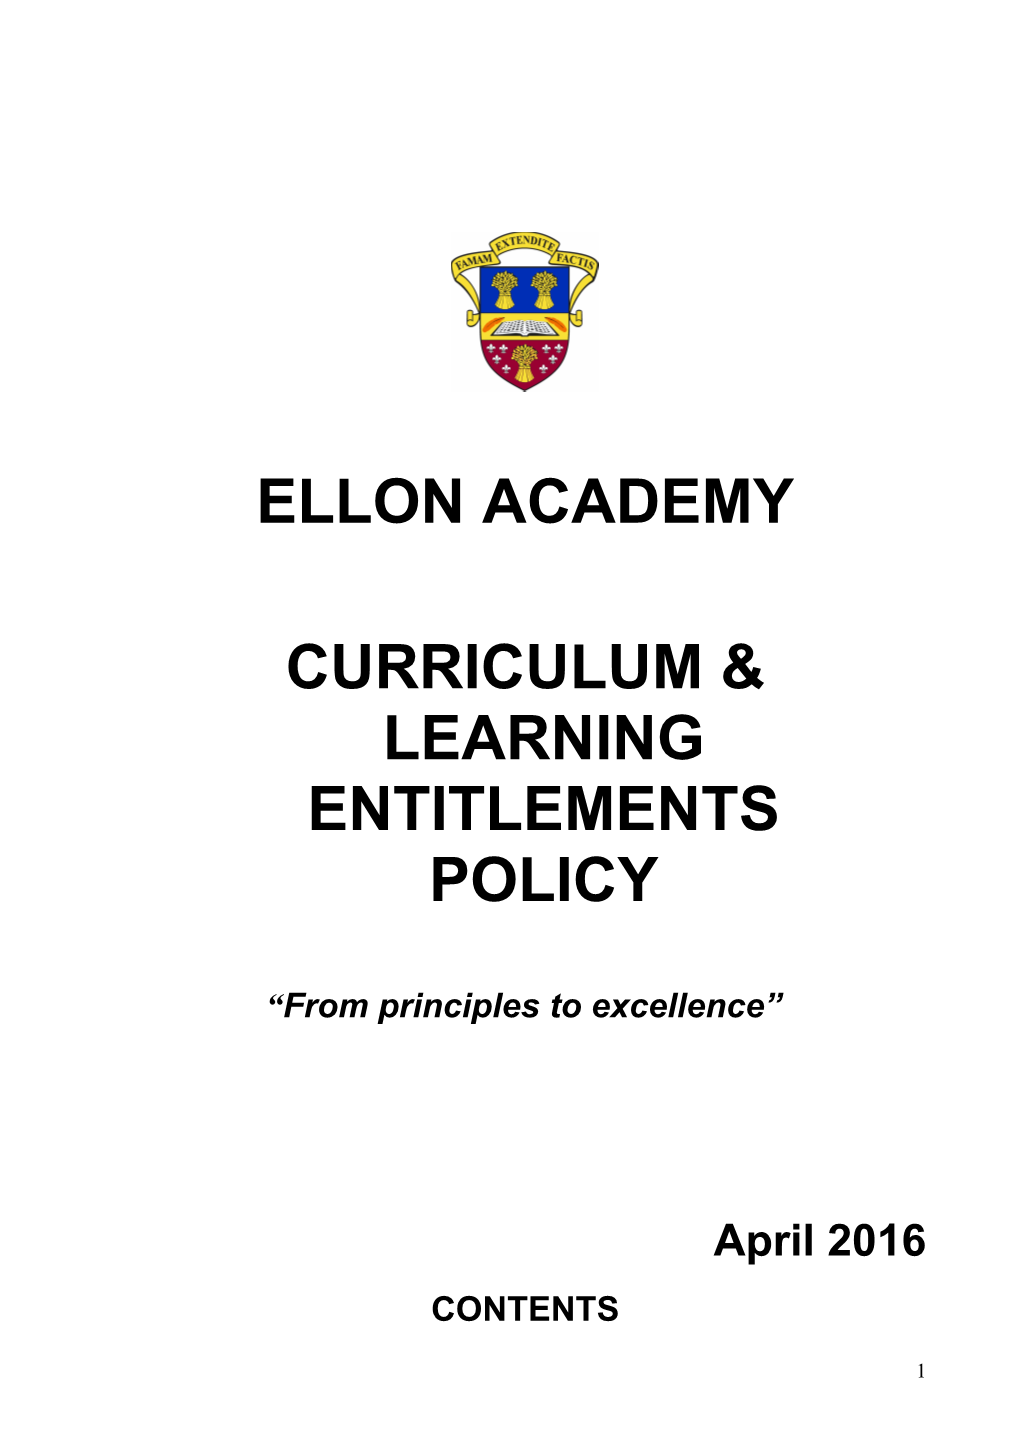 Curriculum & Learning Entitlements Policy